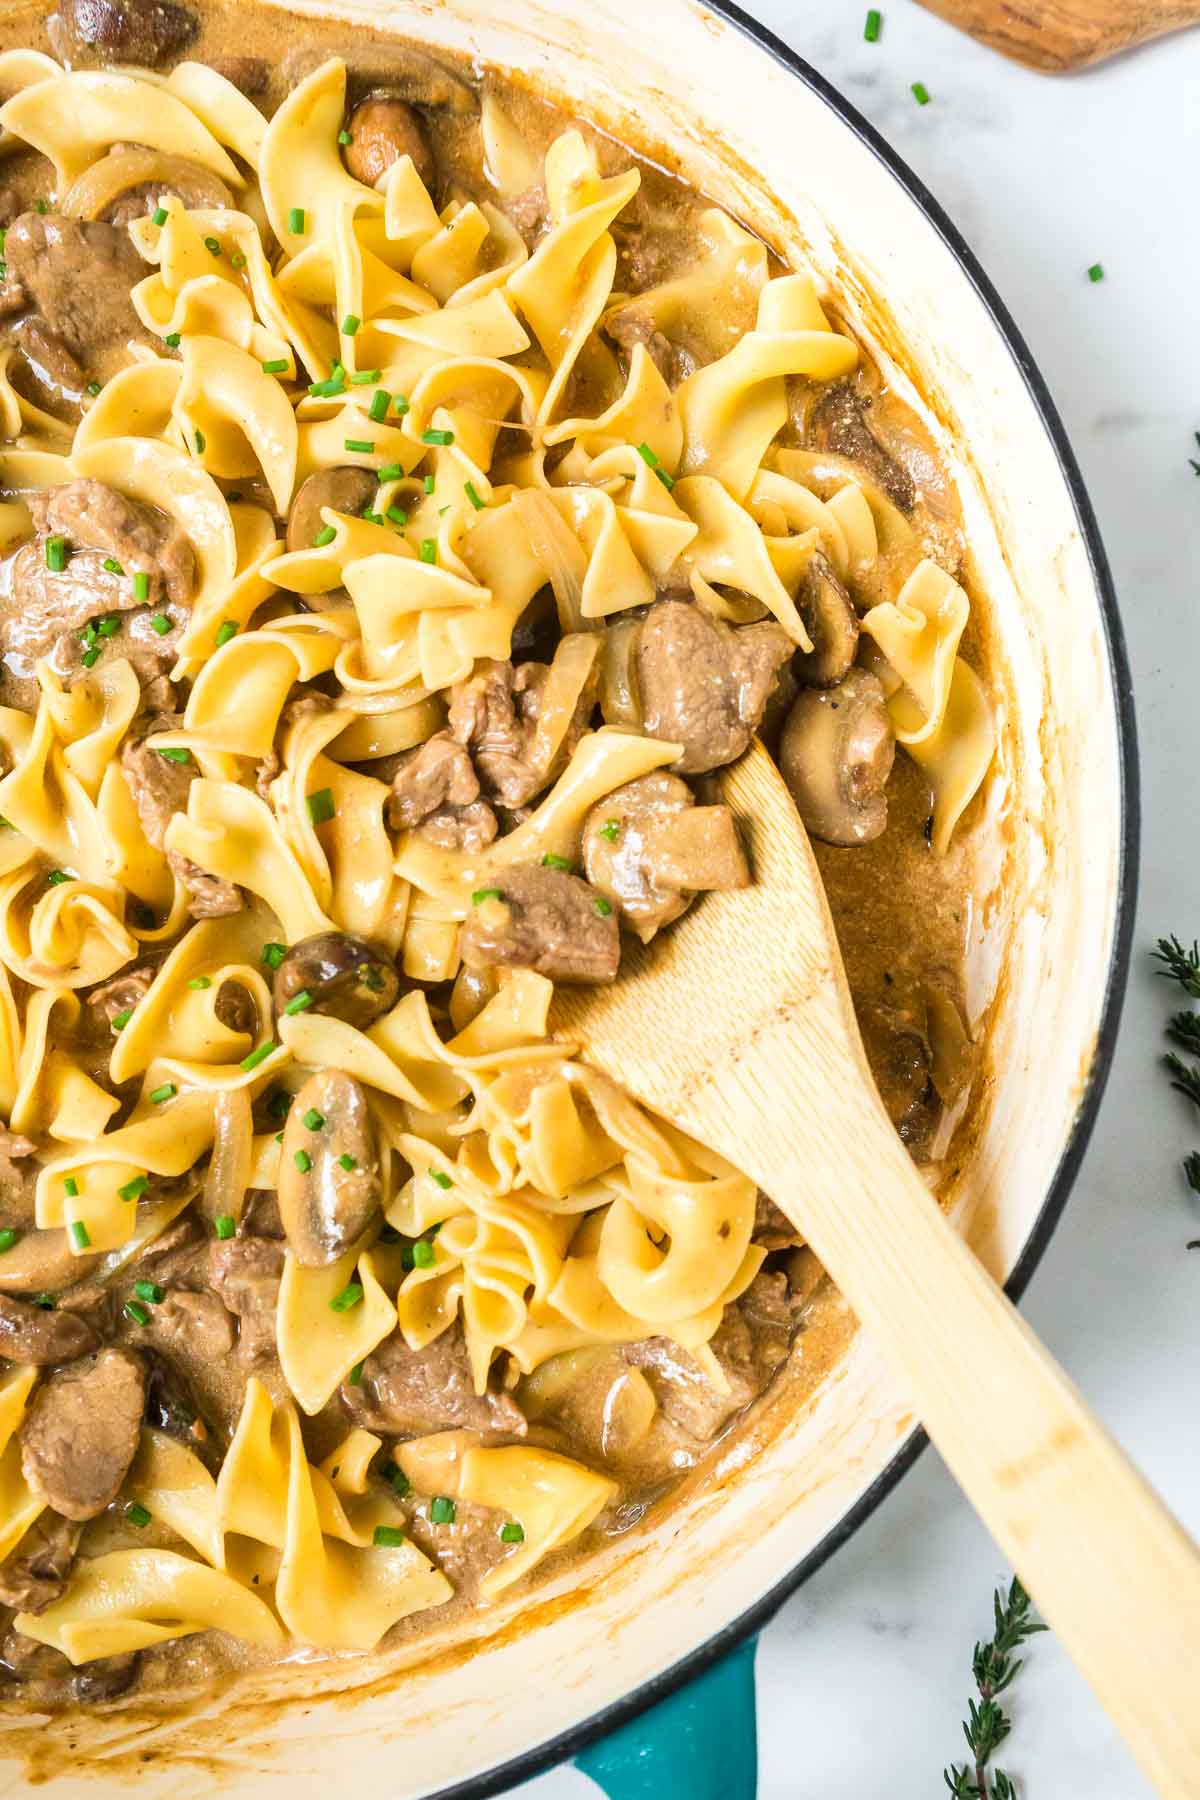 Beef stroganoff with egg noodles in a pan with a wooden spoon.